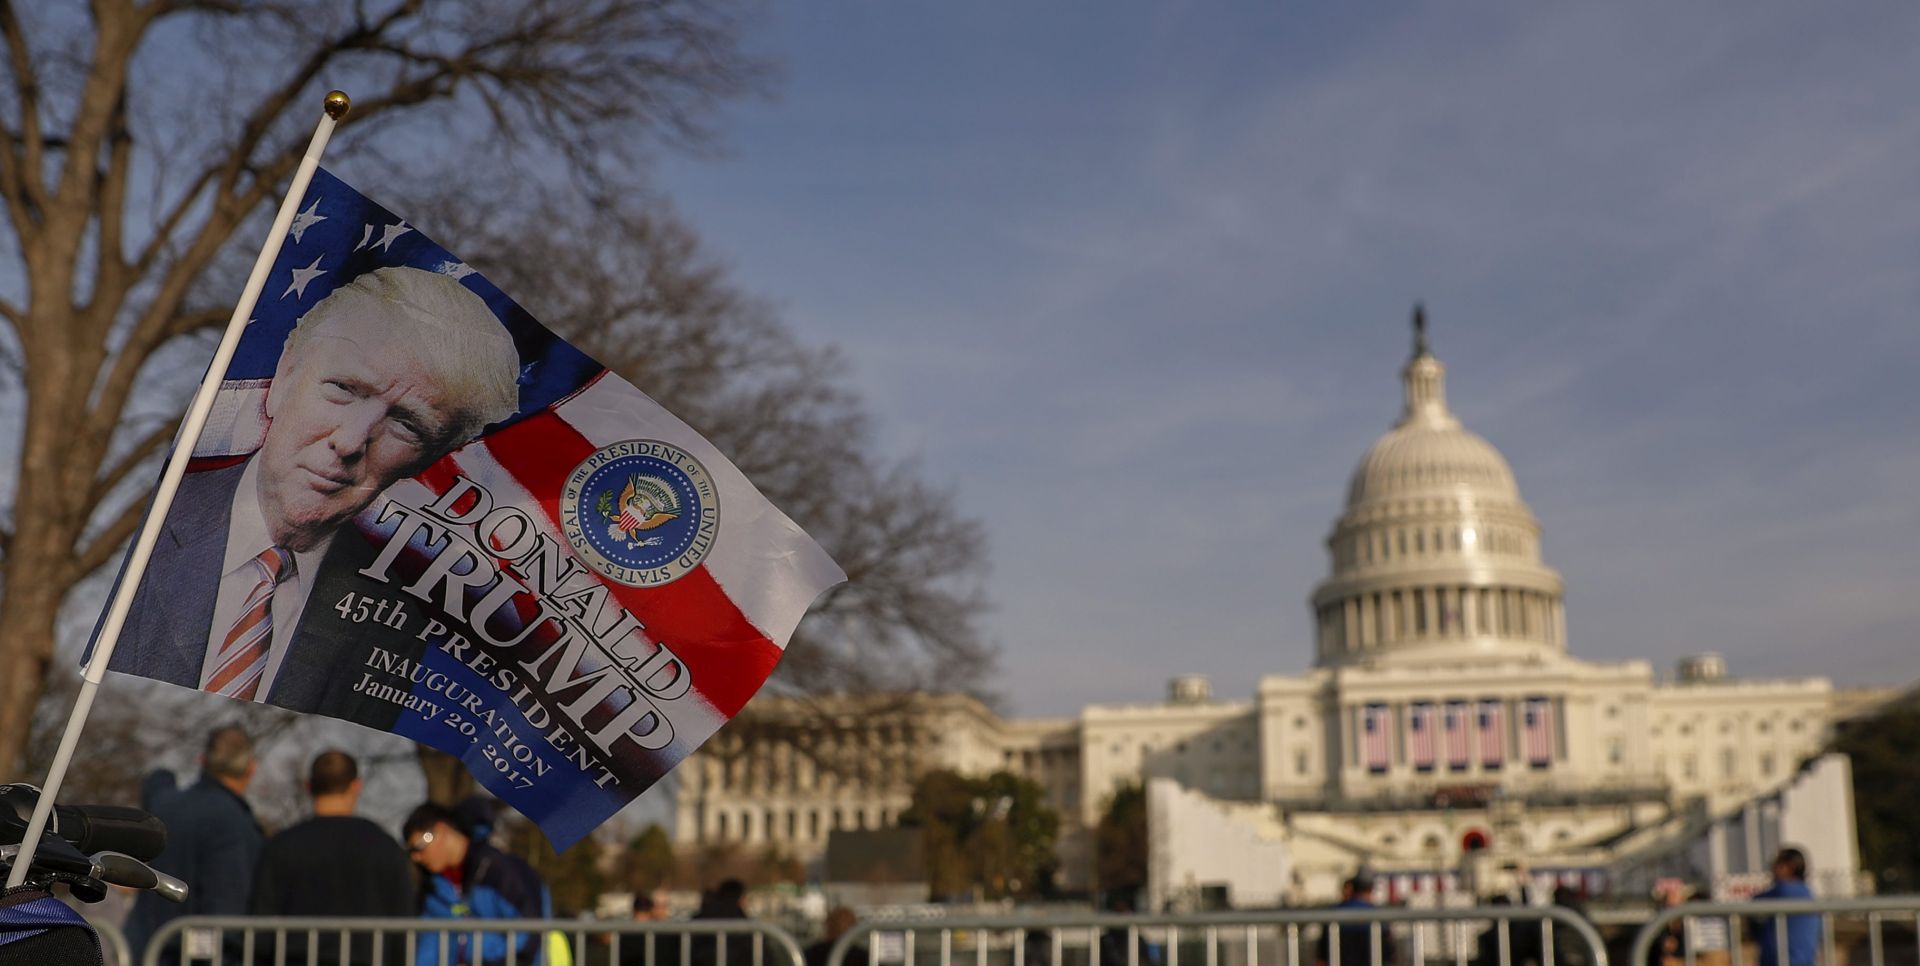 epa05732478 A supporter's flag outside the US Capitol on the eve of President-elect Donald J. Trump's inauguration as the 45th President of the United States in Washington, DC, USA, 19 January 2017. Trump won the 08 November 2016 election to become the next US President.  EPA/ERIK S. LESSER